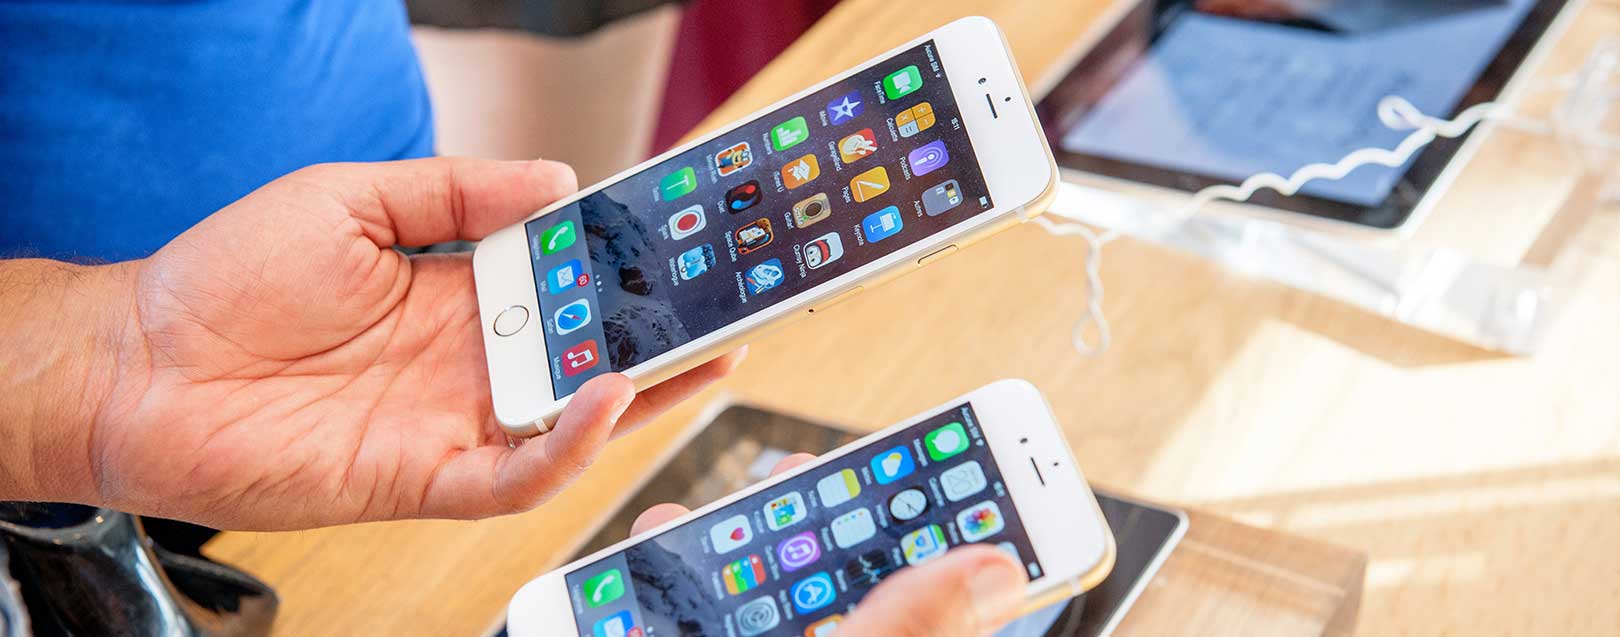 India rejects Apple's plan to import used iPhones